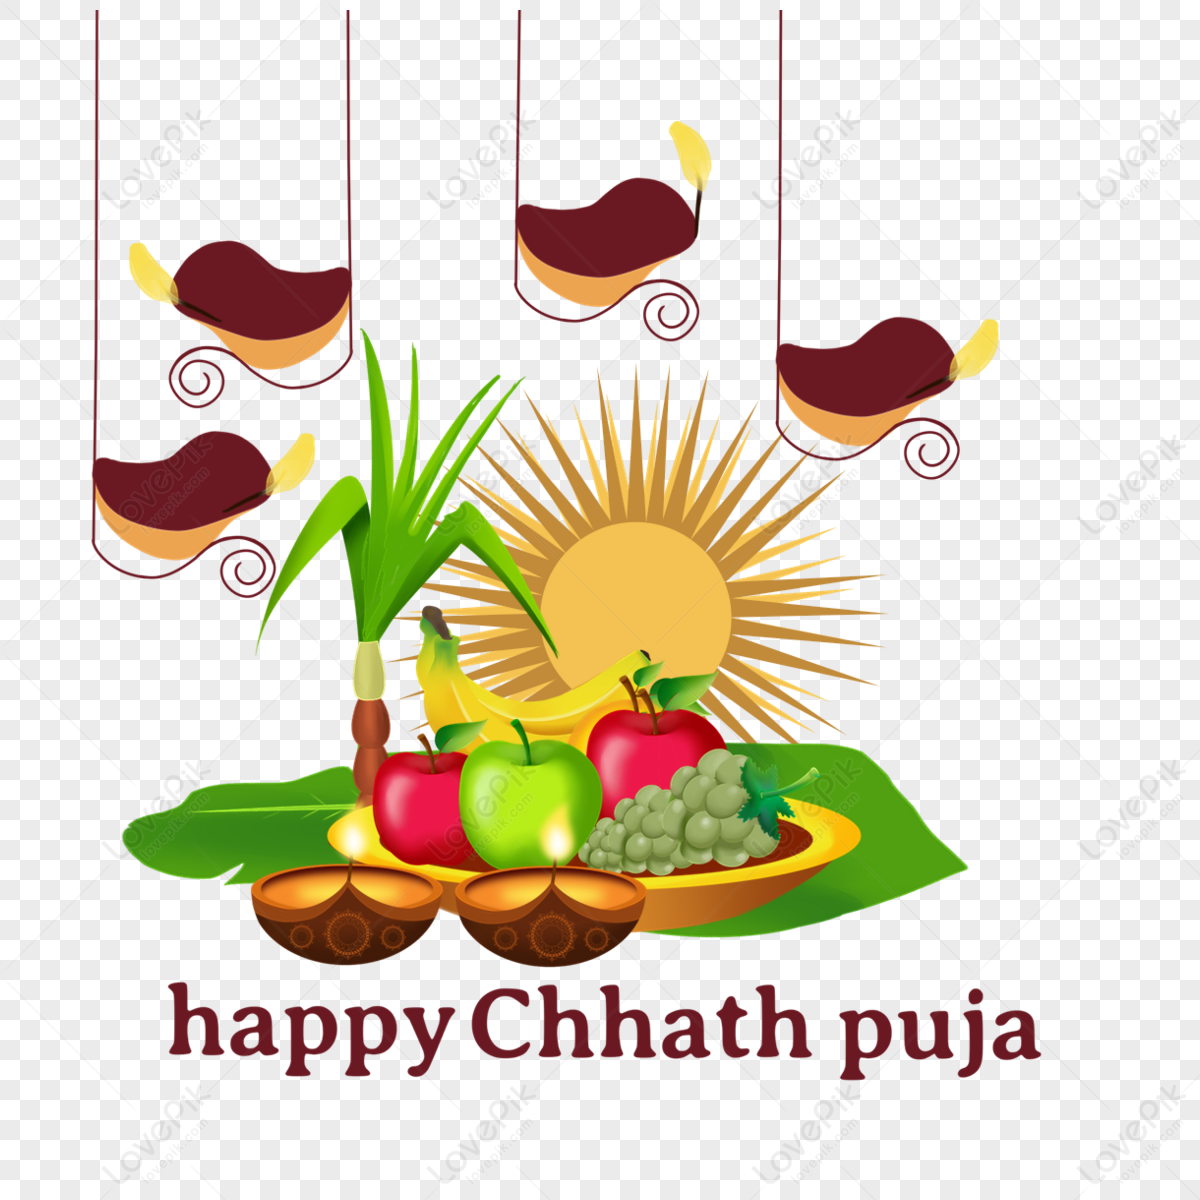 Happy Chhath Puja White Transparent, Gorgeous Happy Chhath Puja Vegetable  And Fruit Illustration, Gorgeous, Vegetables, Ketepuja Festival PNG Image  For Free Download